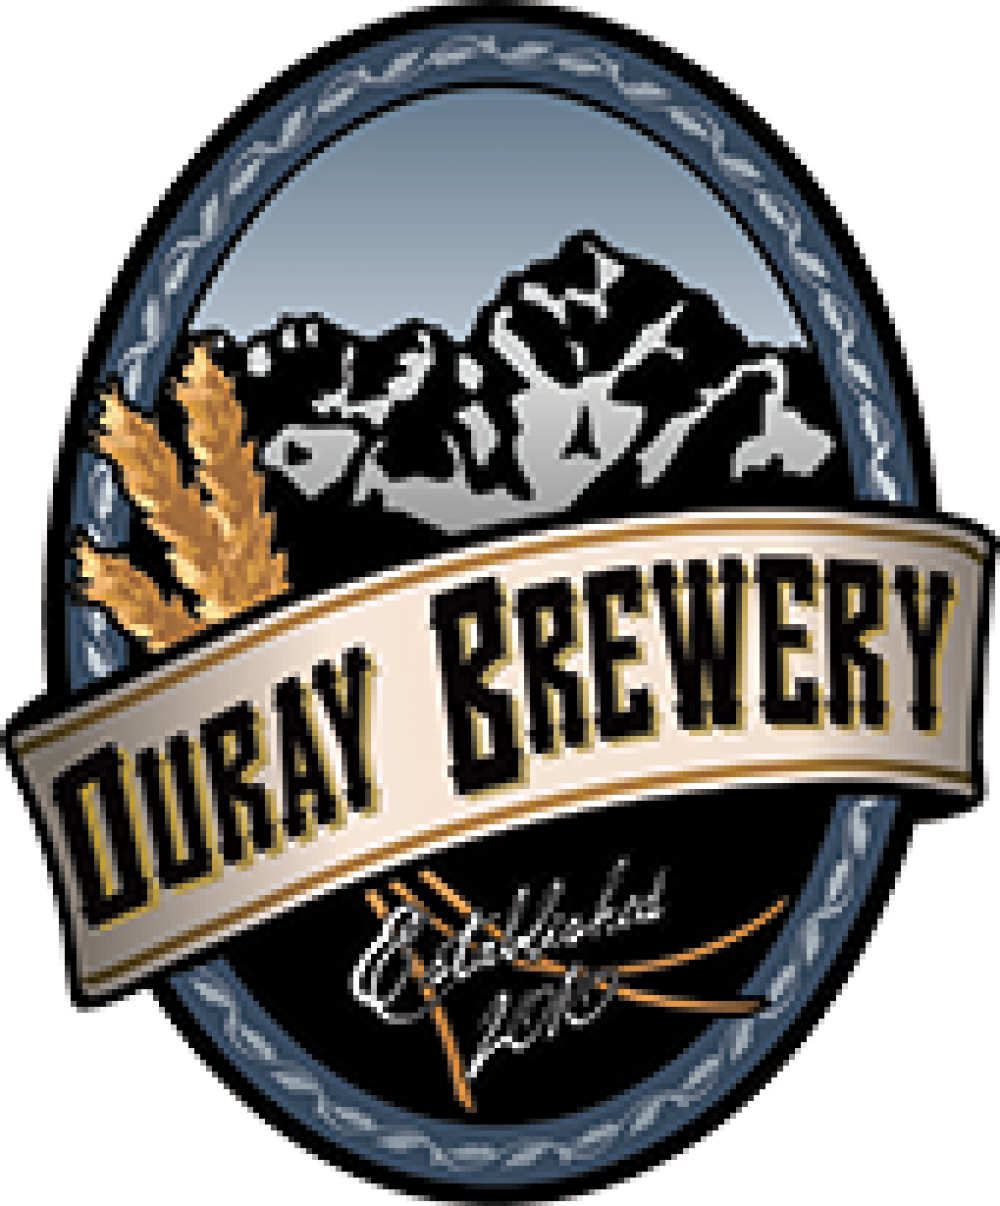 Ouray Brewery